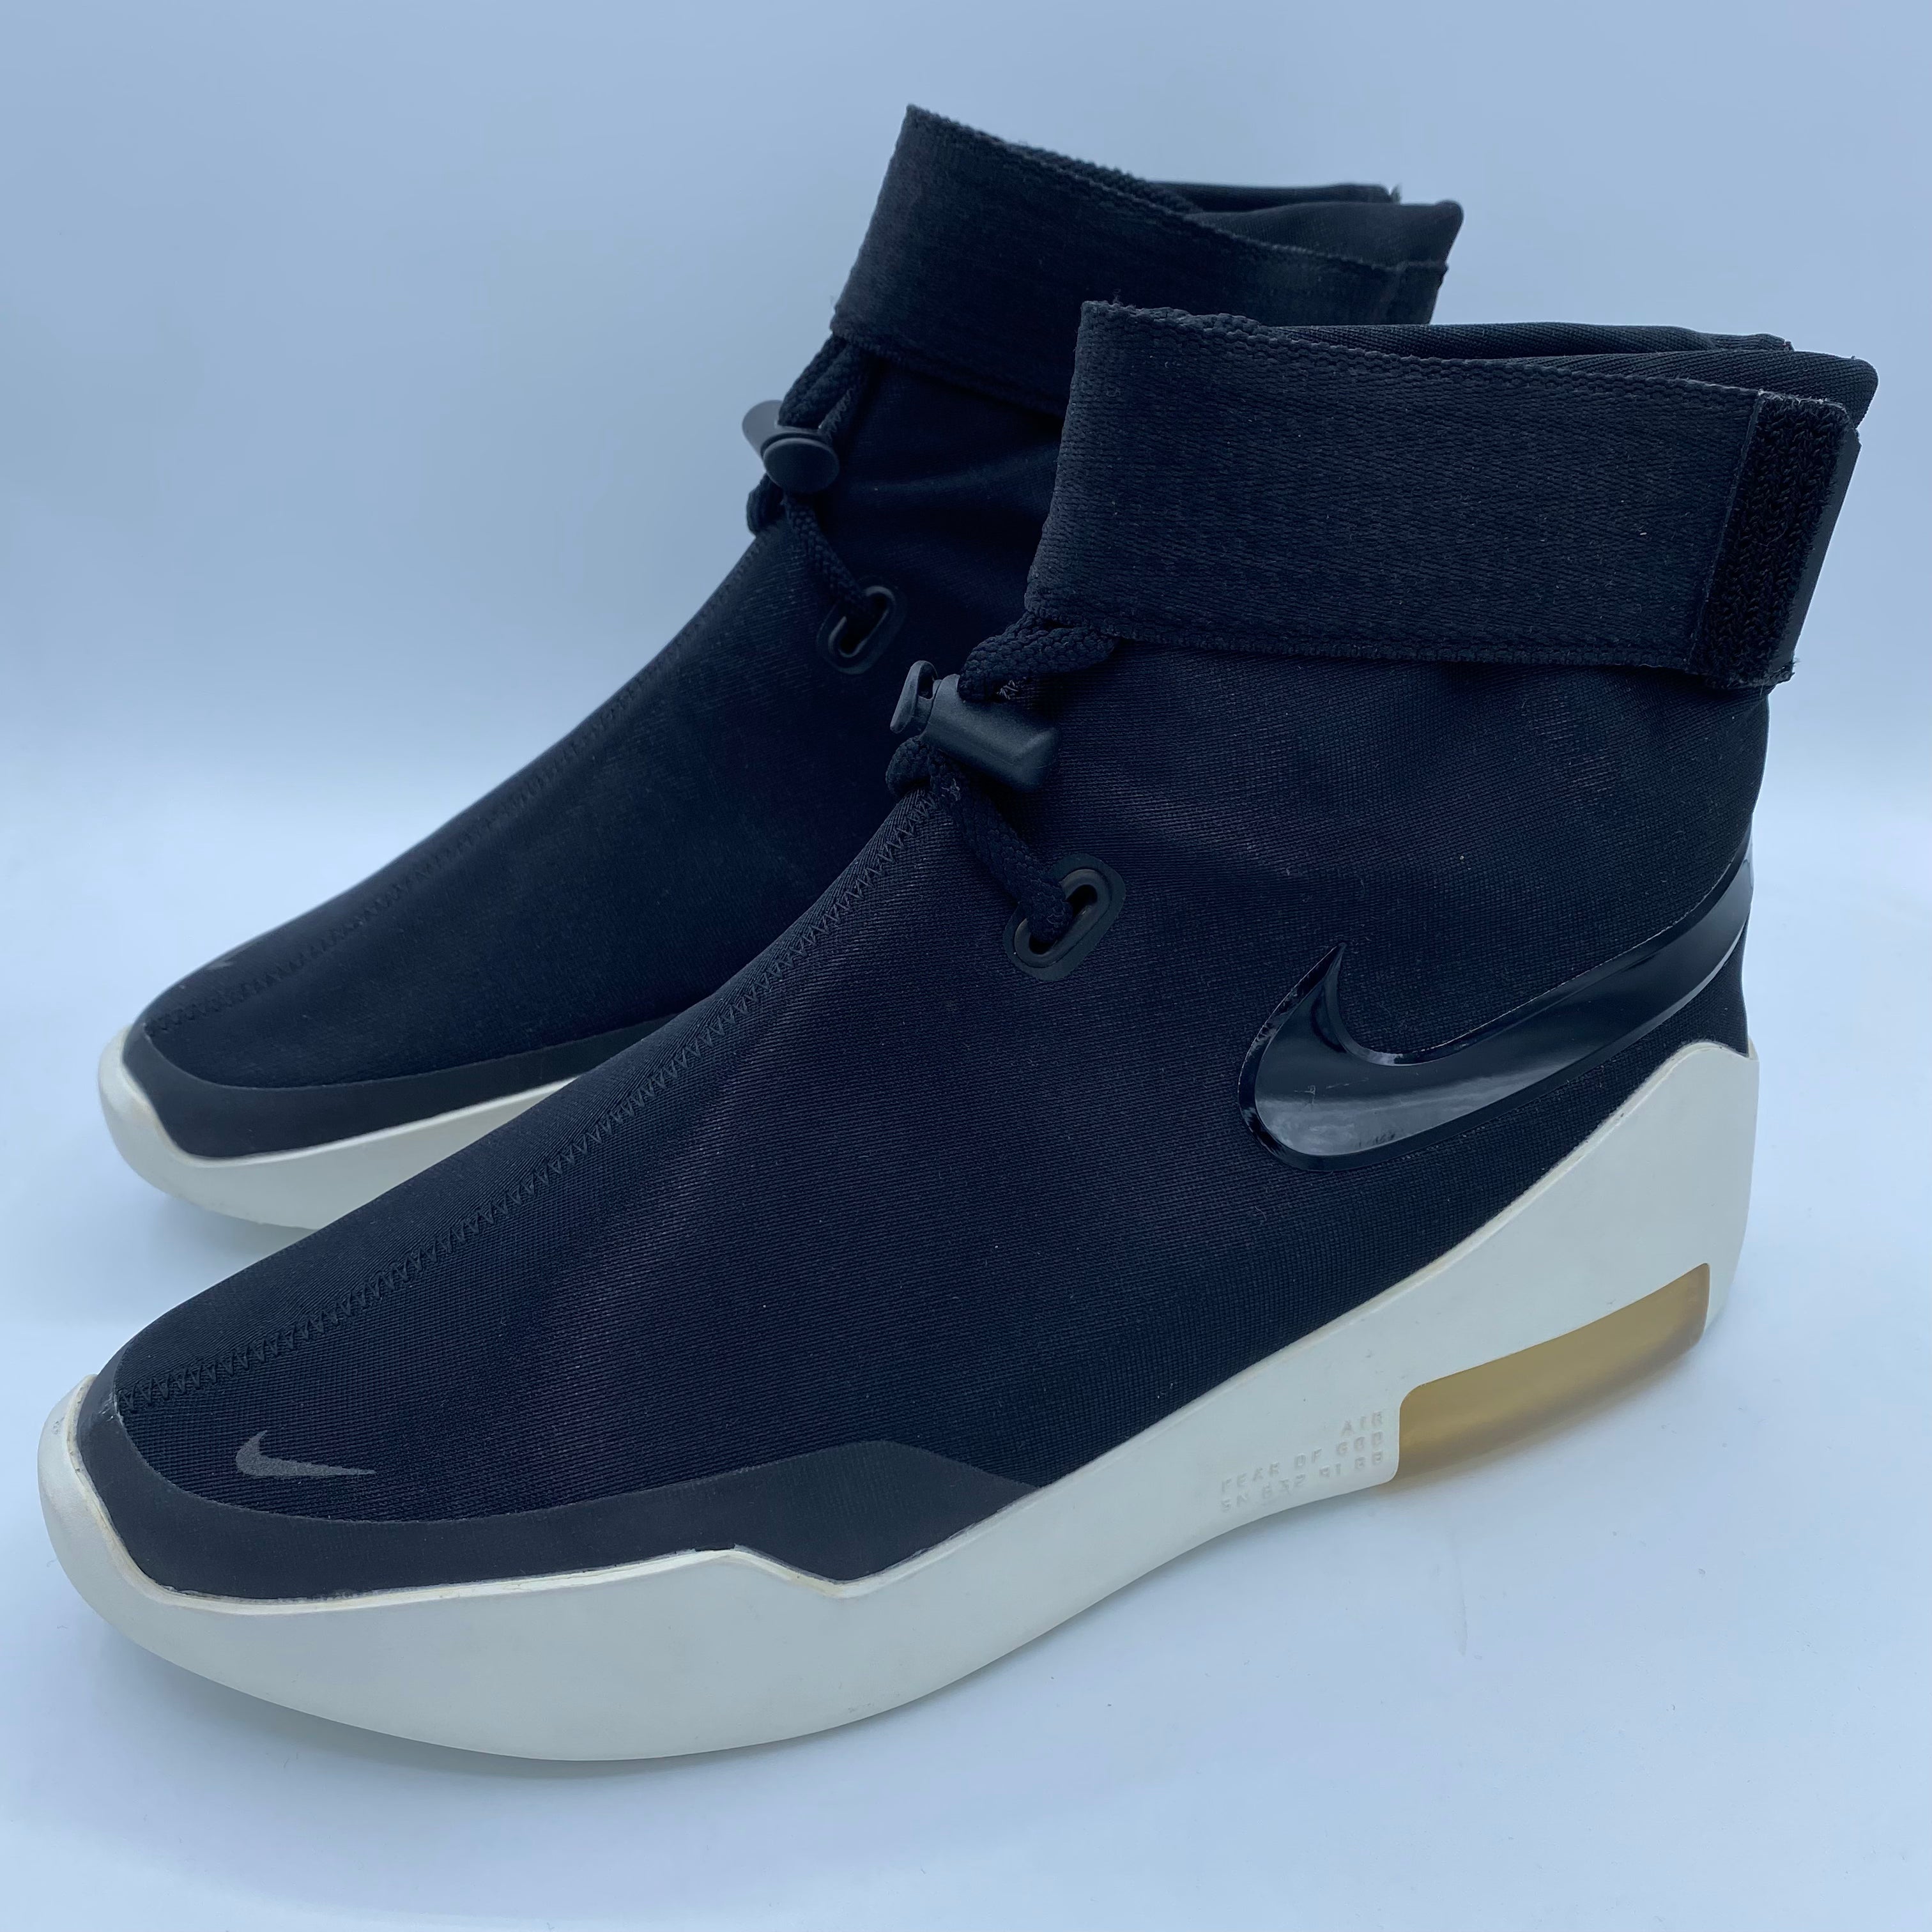 Nike Air Fear of God Shoot-Around Black (Worn Once) – Utopia Shop